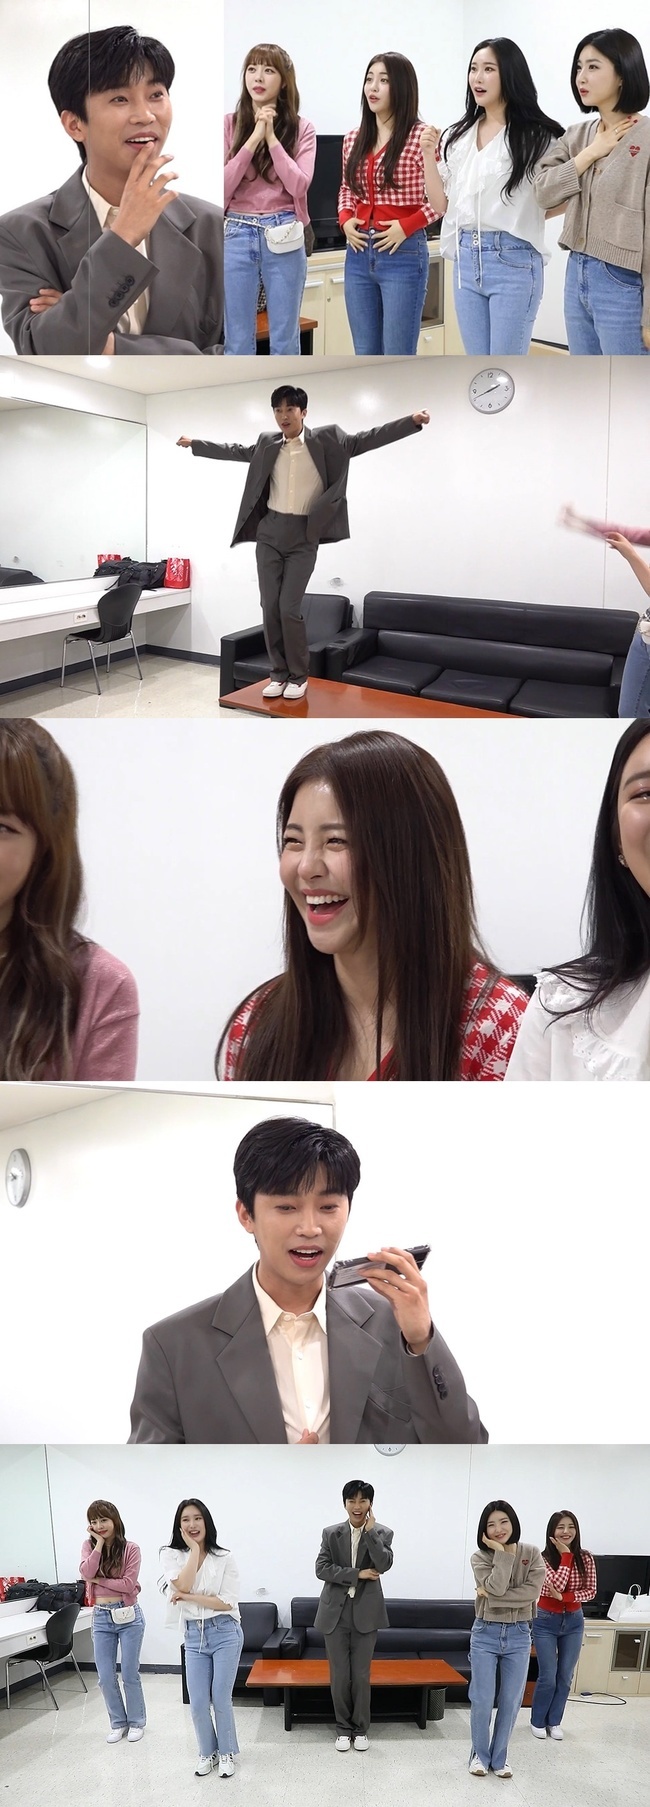 Group Brave Girls meets singer Lim Young-woongMBC Point of Omniscient Interfere (planned by Park Jung-gyu / directed by Noshi Yong, Chae Hyun-seok / hereinafter Point of Omniscient Interfere) will be broadcast on April 10th.On this day, Brave Girls have a surprise meeting with Lim Young-woong at the Waiting Room.Reverse driving Brave Girls and Trot left Lim Young-woong are said to have created a high tension chemistry and made the Waiting room into a laughing sea.In particular, Lim Young-woong is surprised to show a high-quality Rolin dance, saying, Even if you listen to music, you will dance with Automatic door.Brave Girls members showed a booming reaction to Lim Young-woongs dance dance.Here, Brave Girls Minyoung is said to have challenged Lim Young-woongs patented personal period. What was the personal period that Minyoung introduced?I wonder what Lim Young-woongs reaction would have been.